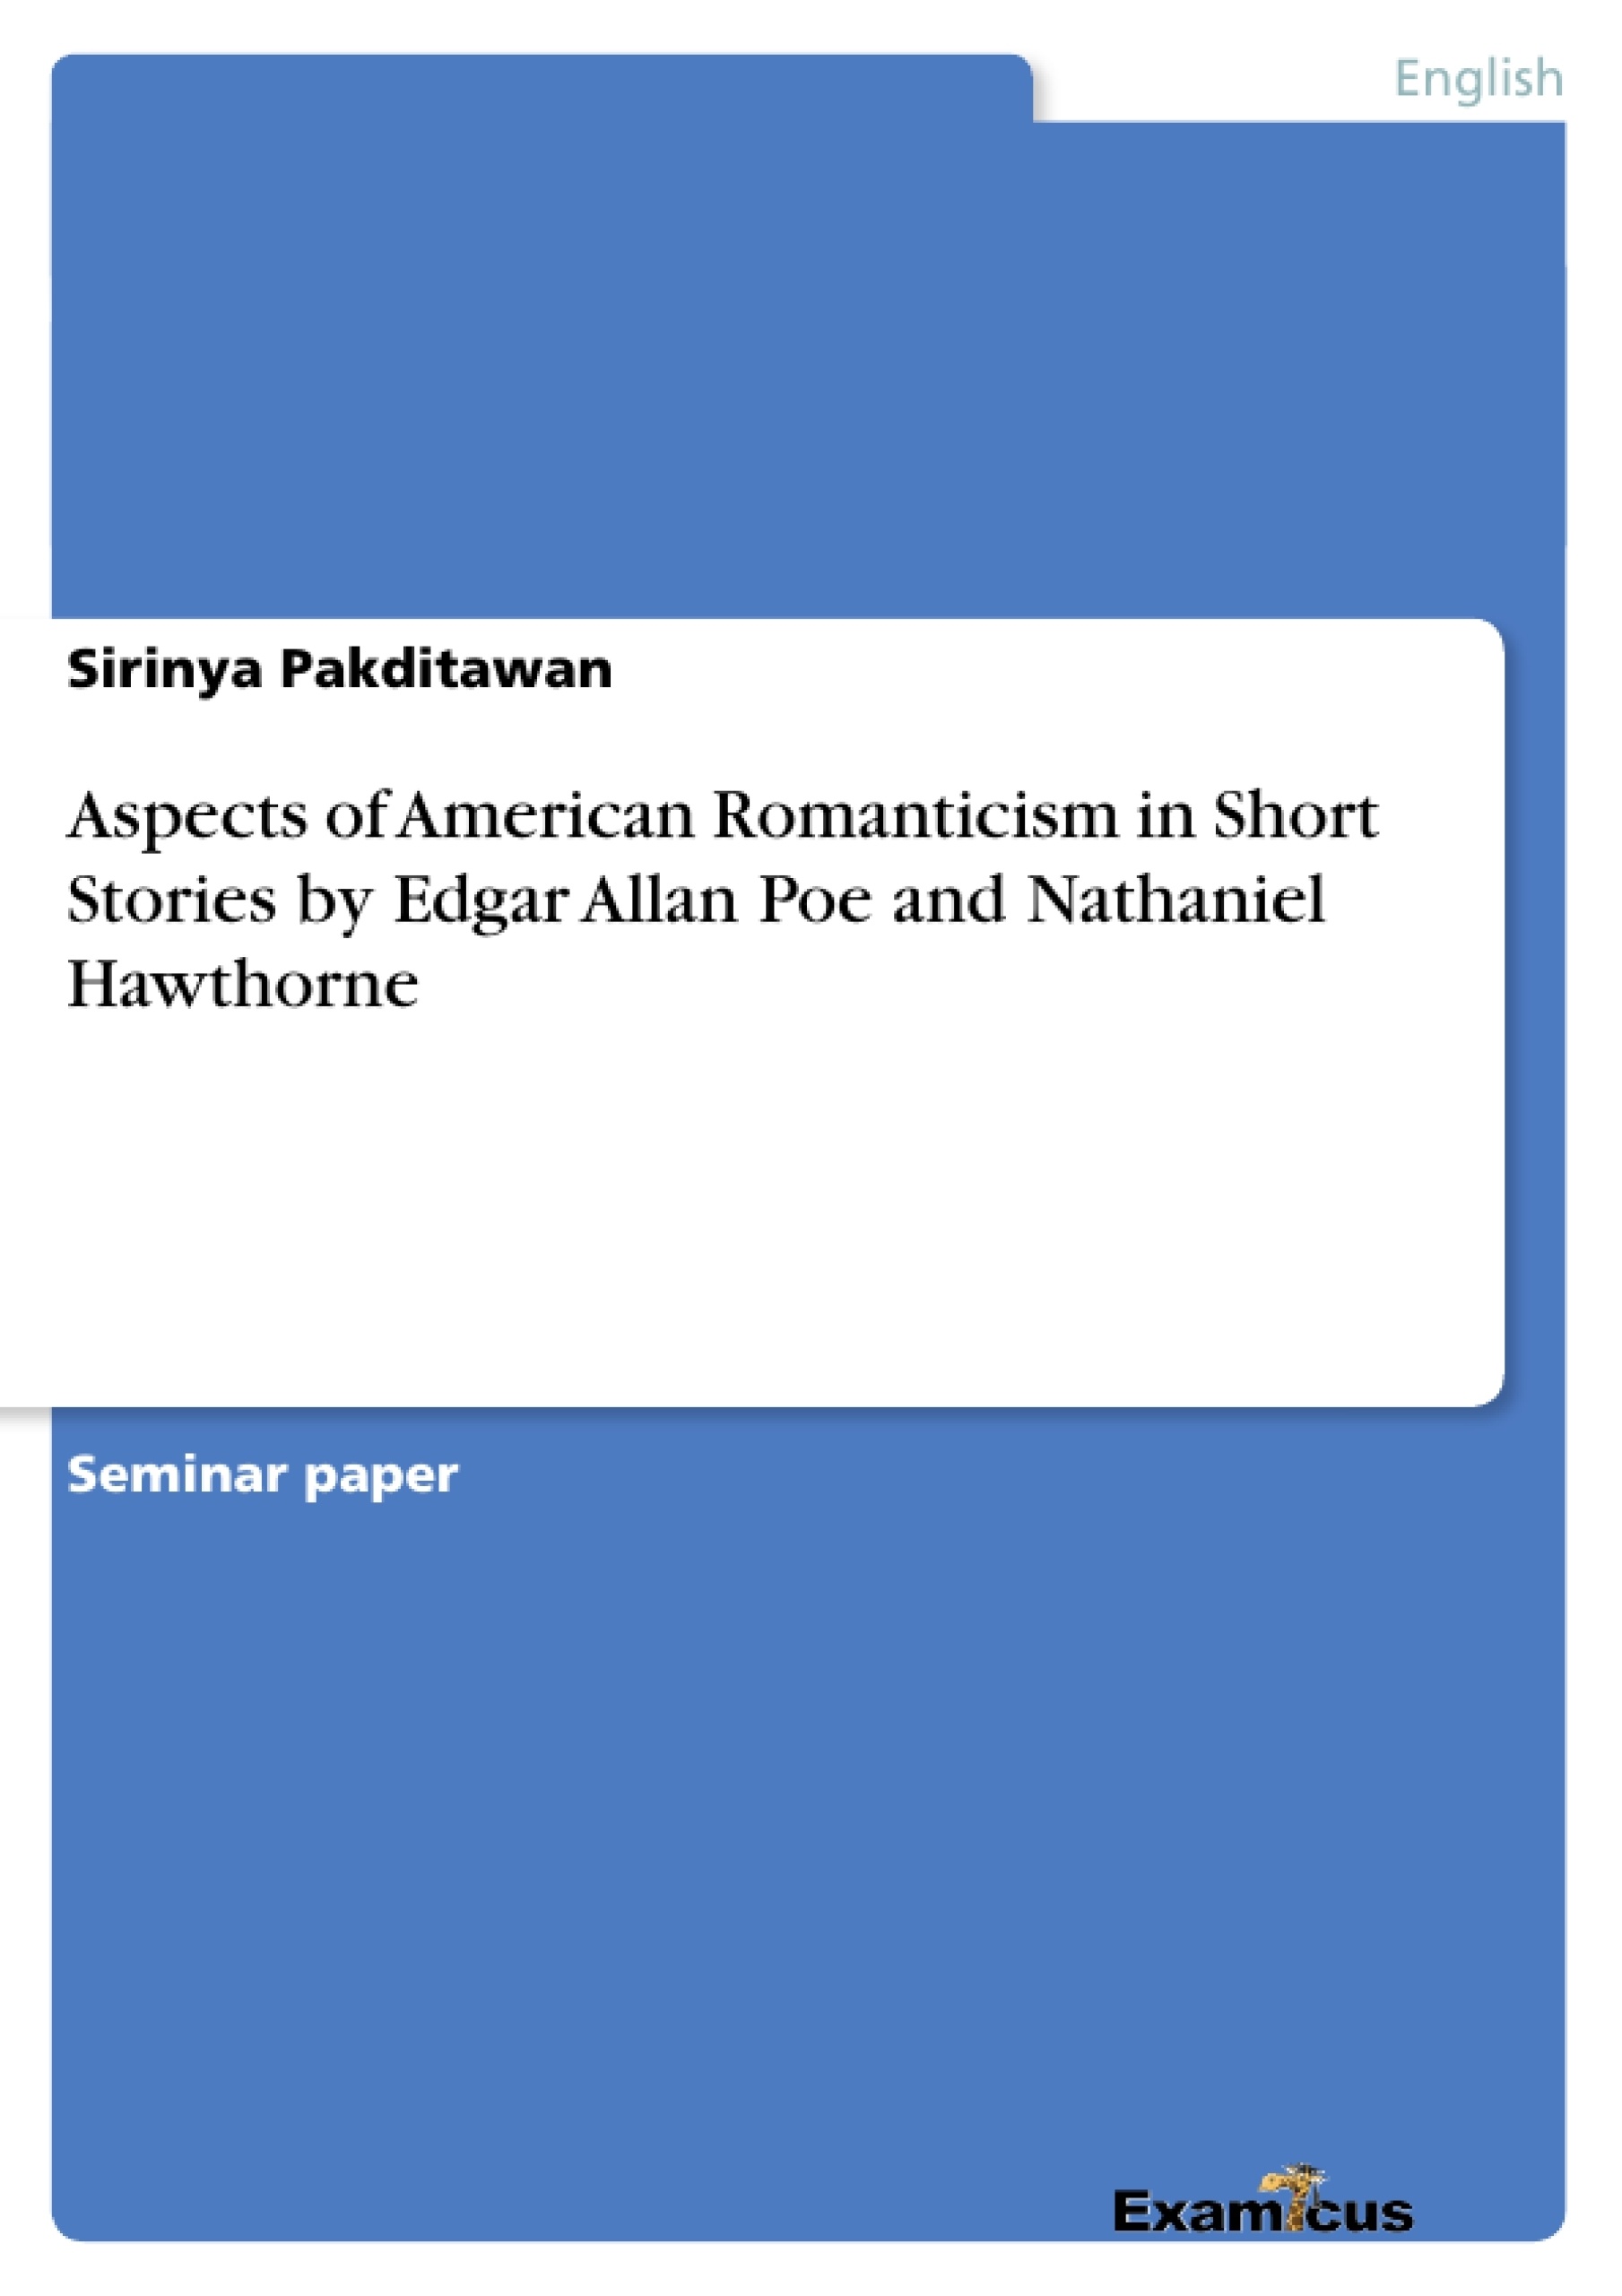 Título: Aspects of American Romanticism in Short Stories by Edgar Allan Poe and Nathaniel Hawthorne